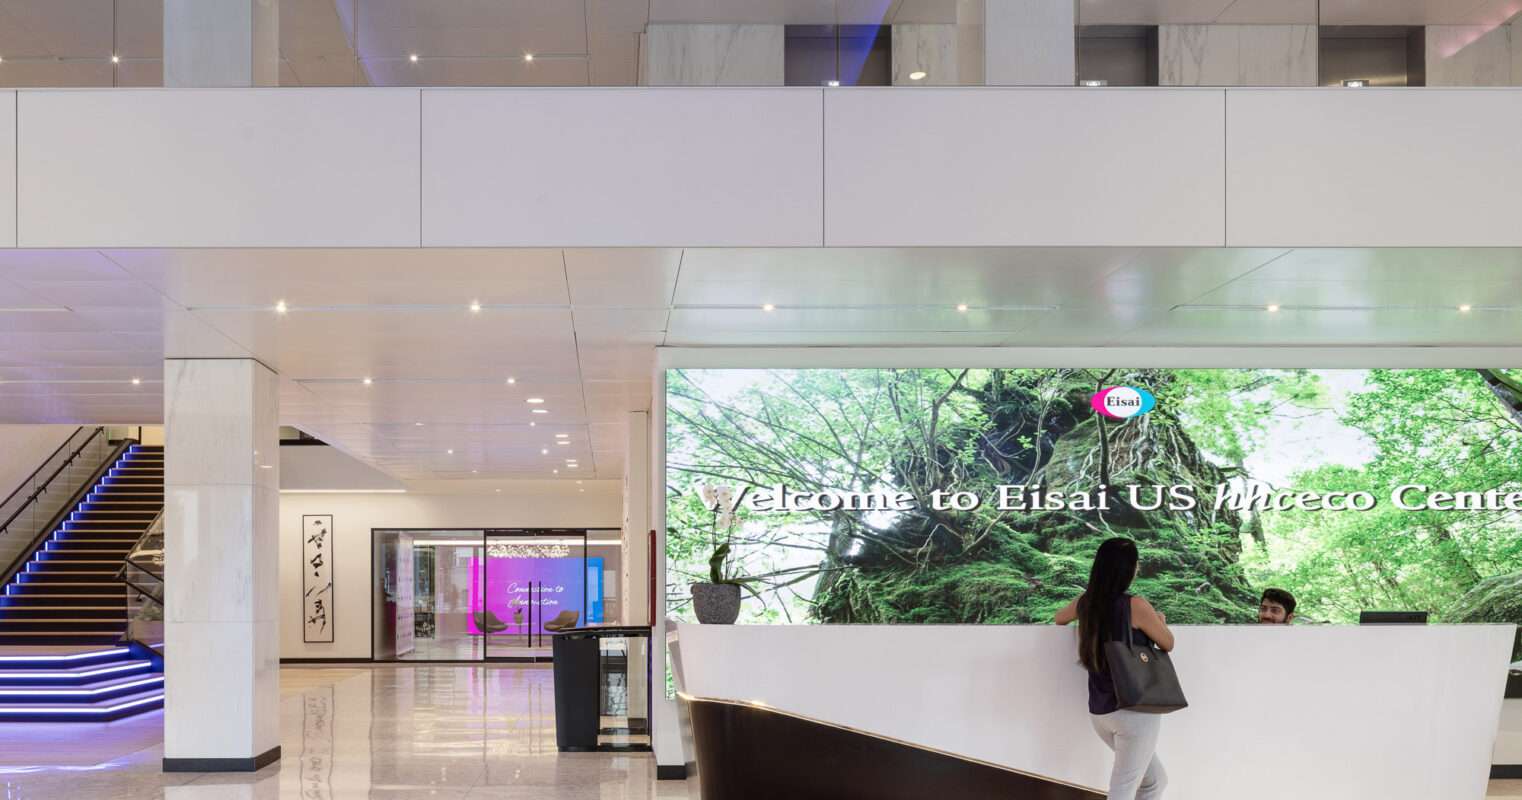 Modern corporate lobby featuring a sleek, white reception desk with embedded LED lighting. A large digital display showcasing nature imagery provides a vibrant backdrop, enhanced by the juxtaposition of minimalist staircases and clean, reflective flooring.